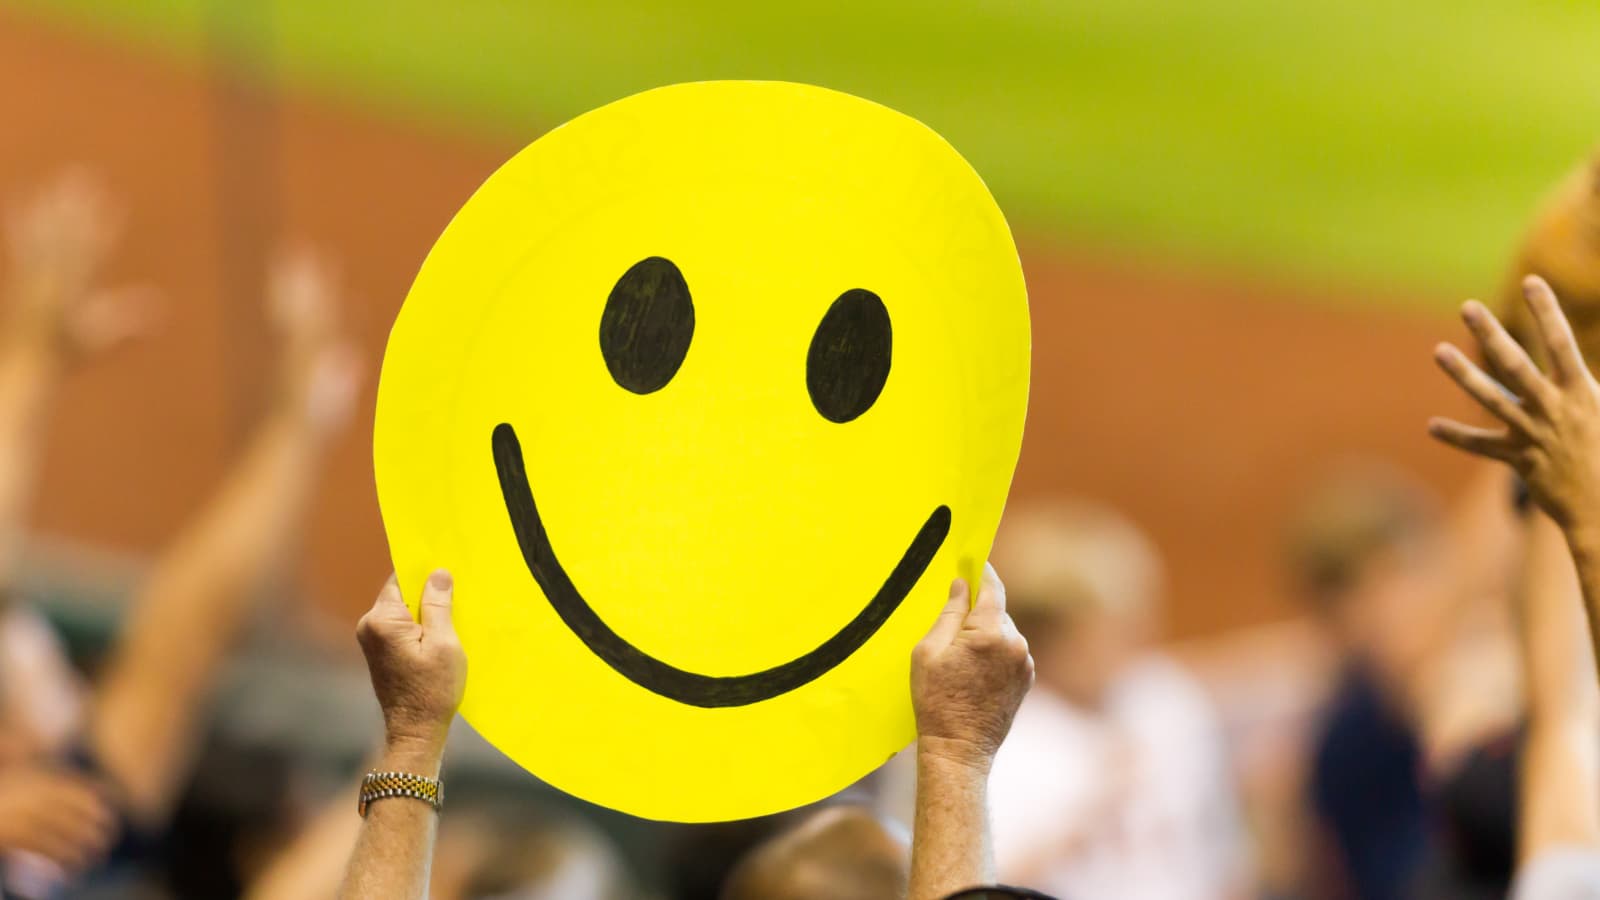 The man behind the smiley face symbol was paid $45 for his design